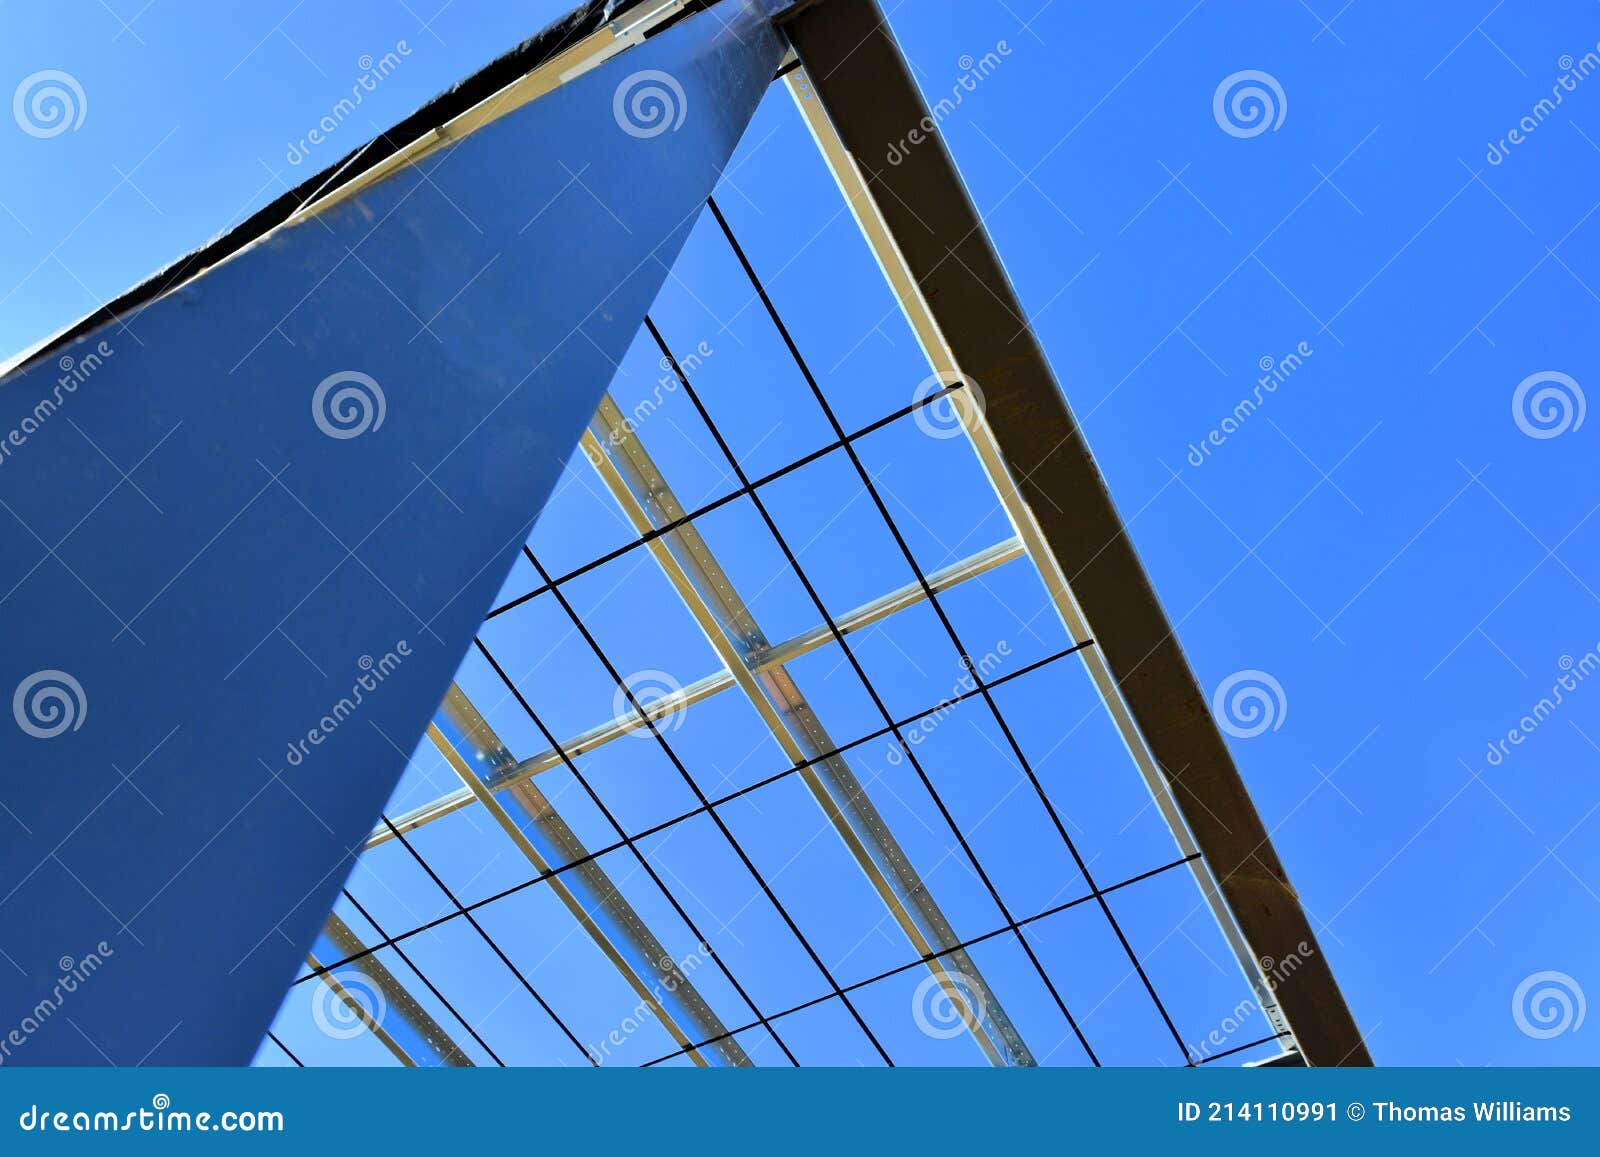 Steel Rafters and Beams of New Building. Stock Image - Image of beams ...